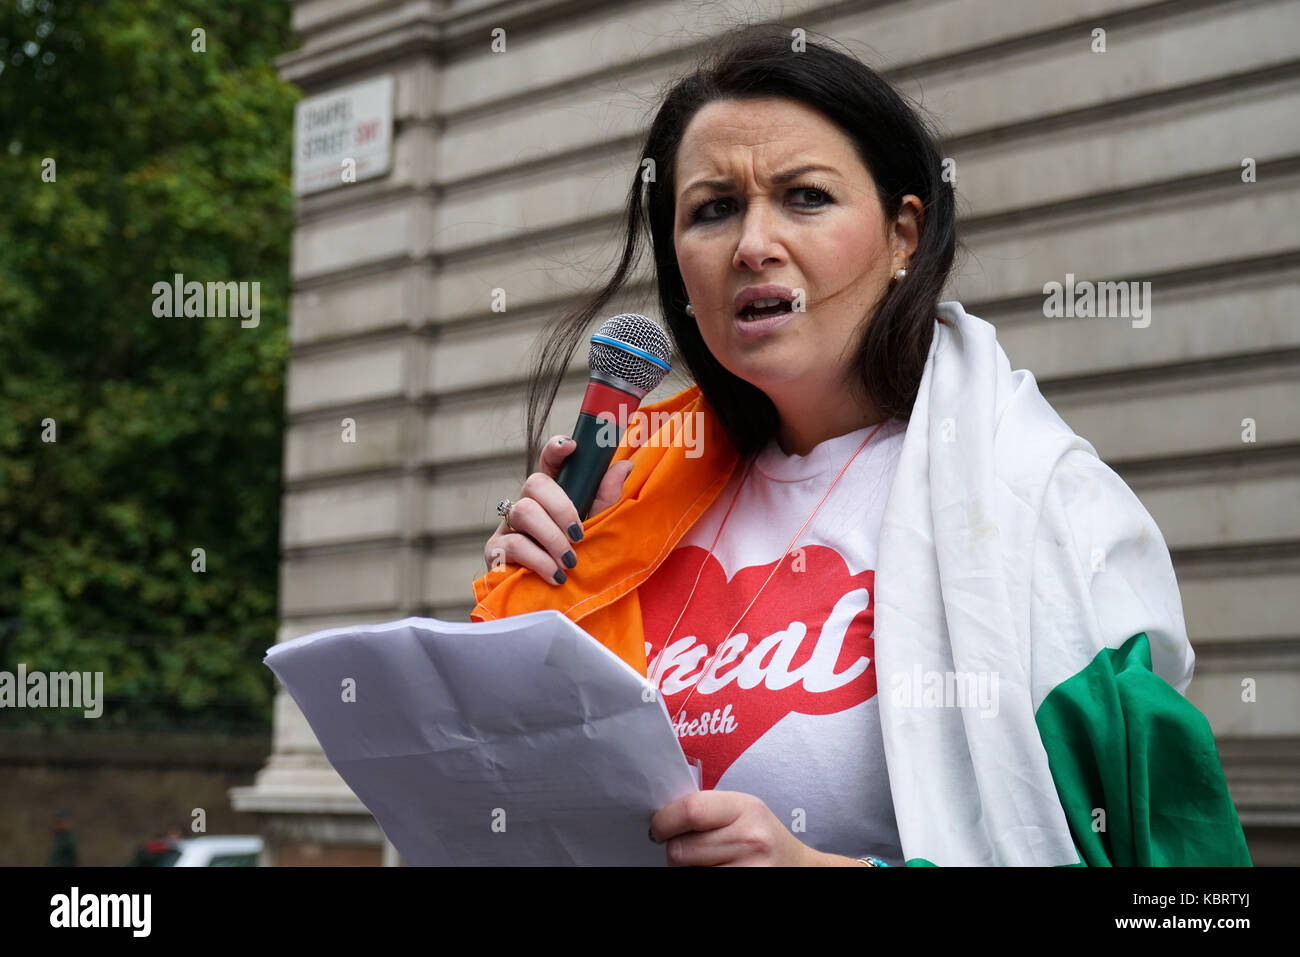 London, England, UK. 30th September 2017.  Hundreds of Pro-abortion campaigners hold a protest to demand abortion rights in Ireland outside Embassy of Ireland. Credit: See Li/Alamy Live News Stock Photo